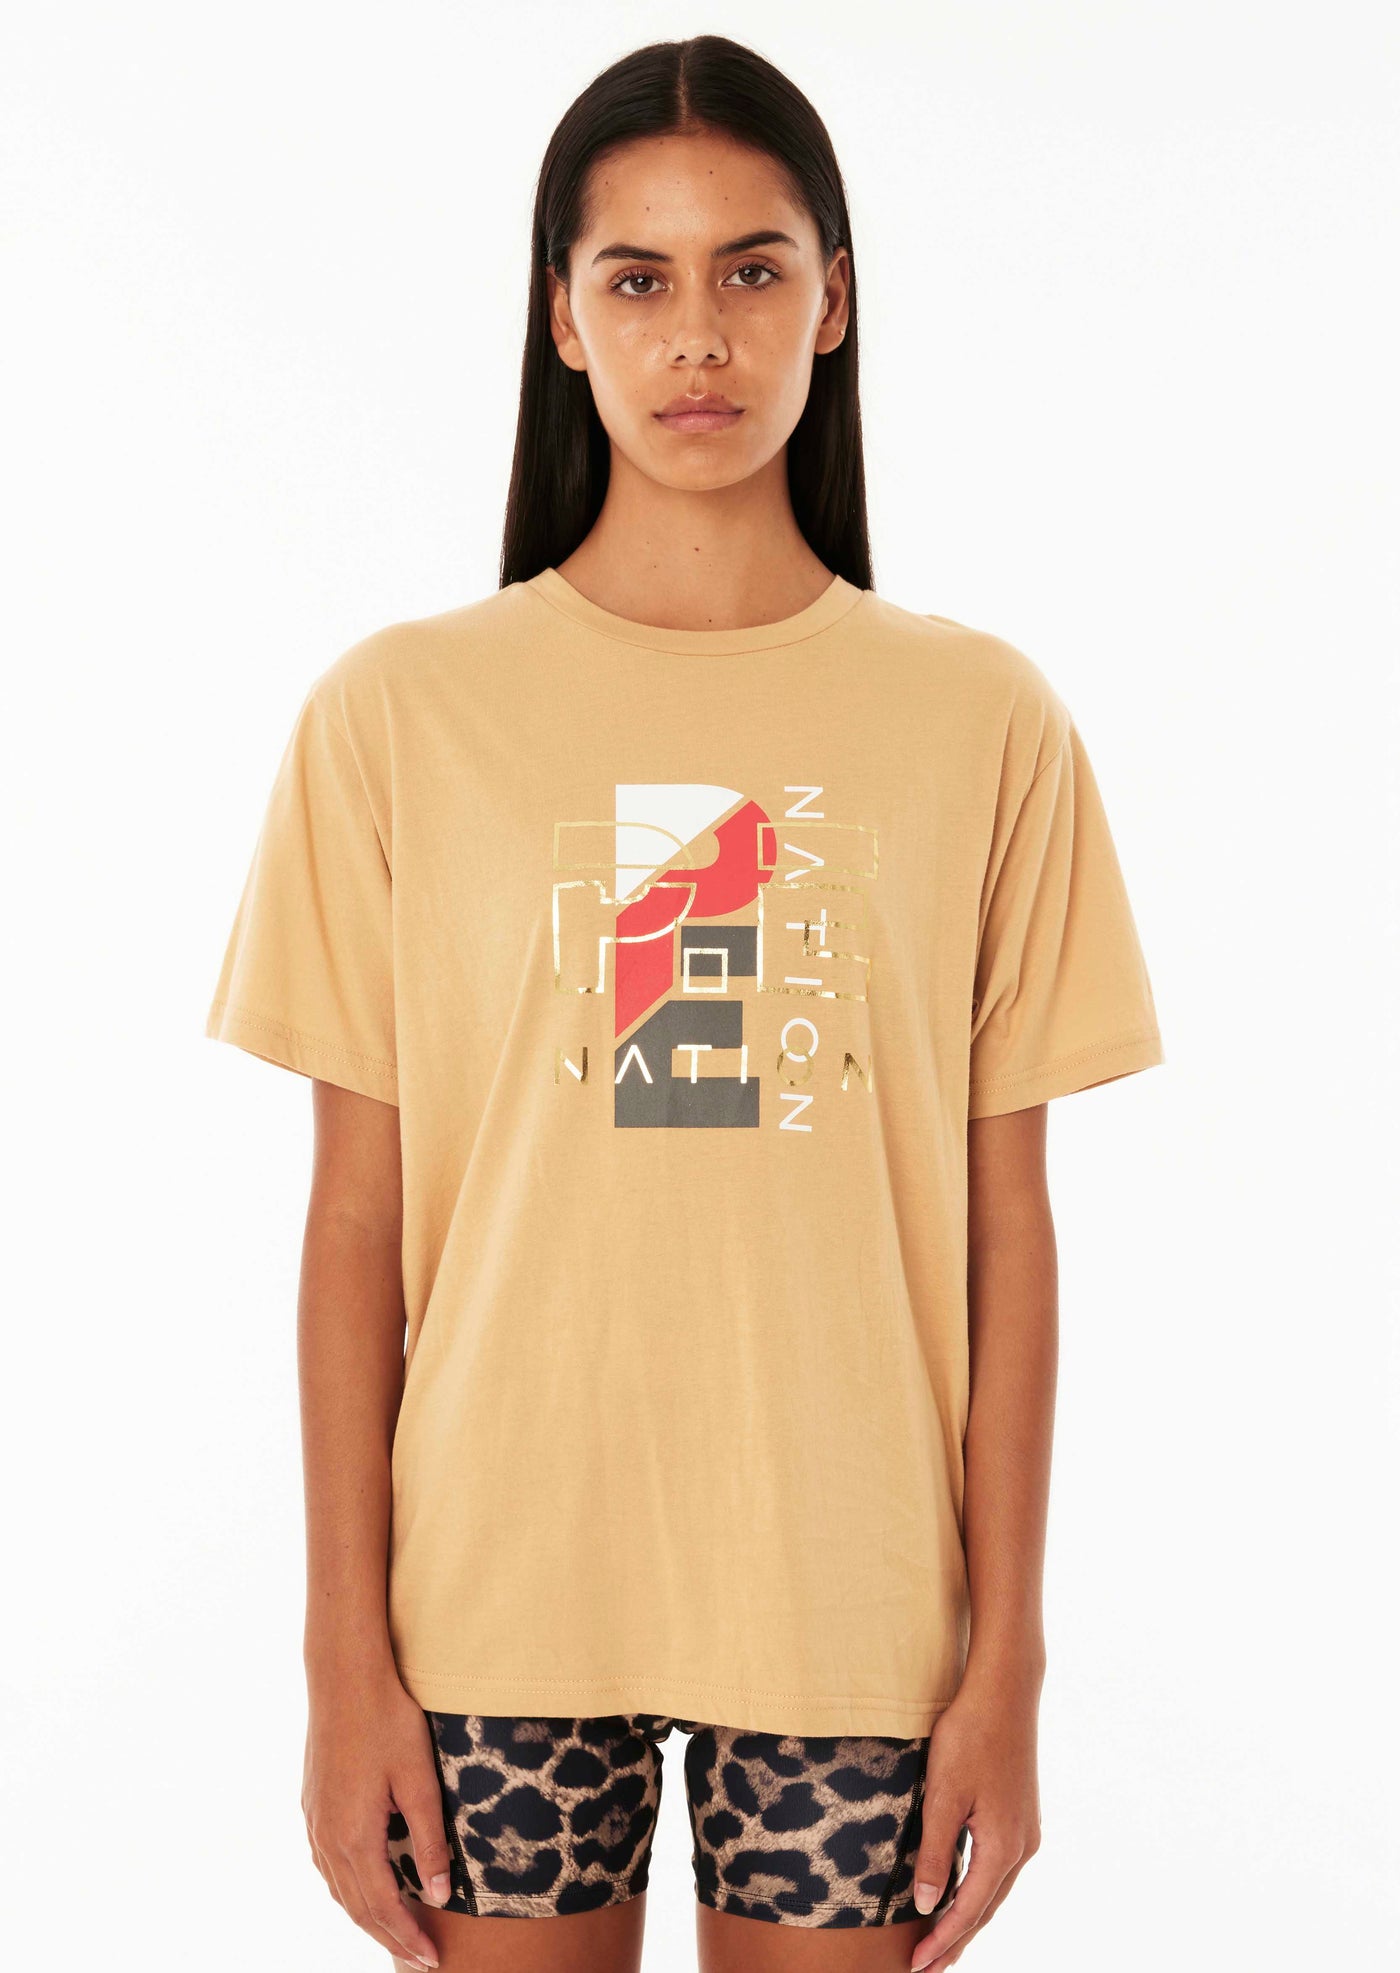 HERITAGE SS TEE IN SAND